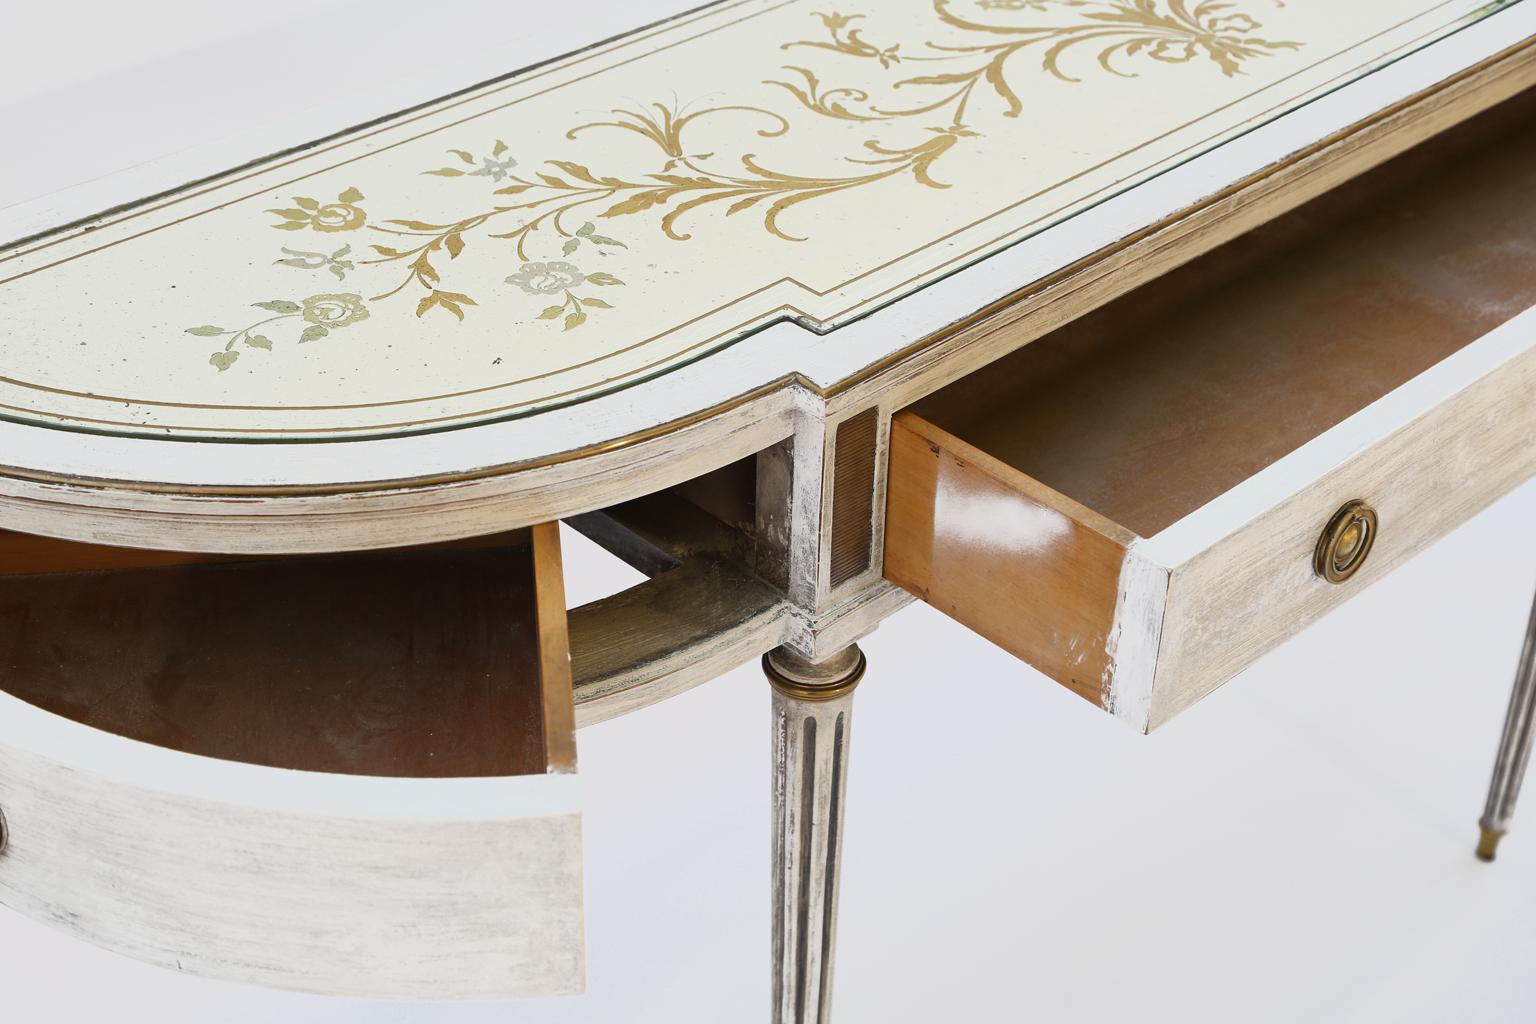 Demilune console table, in Directoire taste, of mahogany, with a painted finish showing natural wear, its églomisé top etched and reverse painted in gold and silver scrolling floral motif, a brass trim borders its top and legs, triple frieze drawers